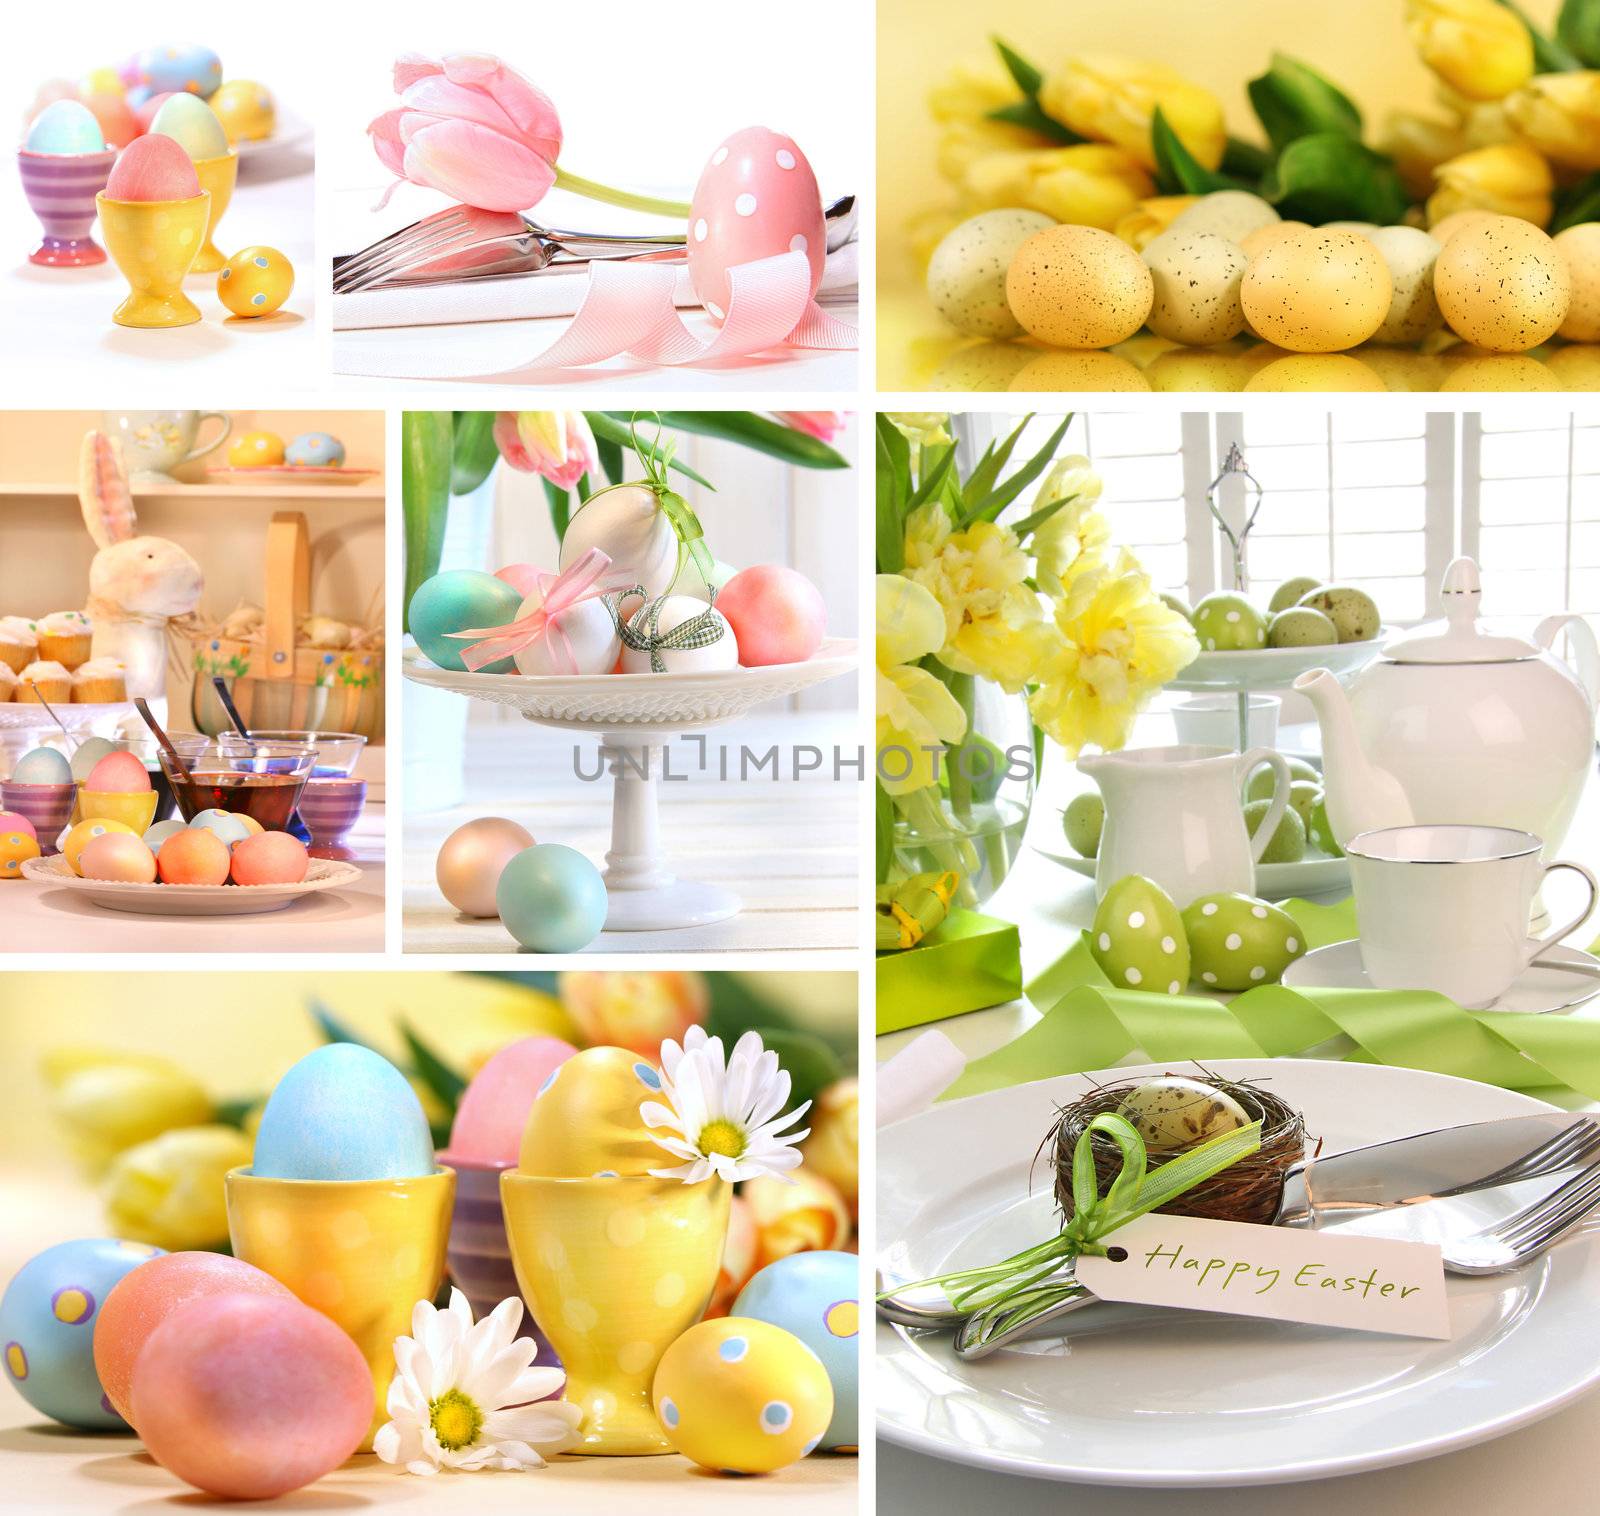 Collage of colorful images for easter